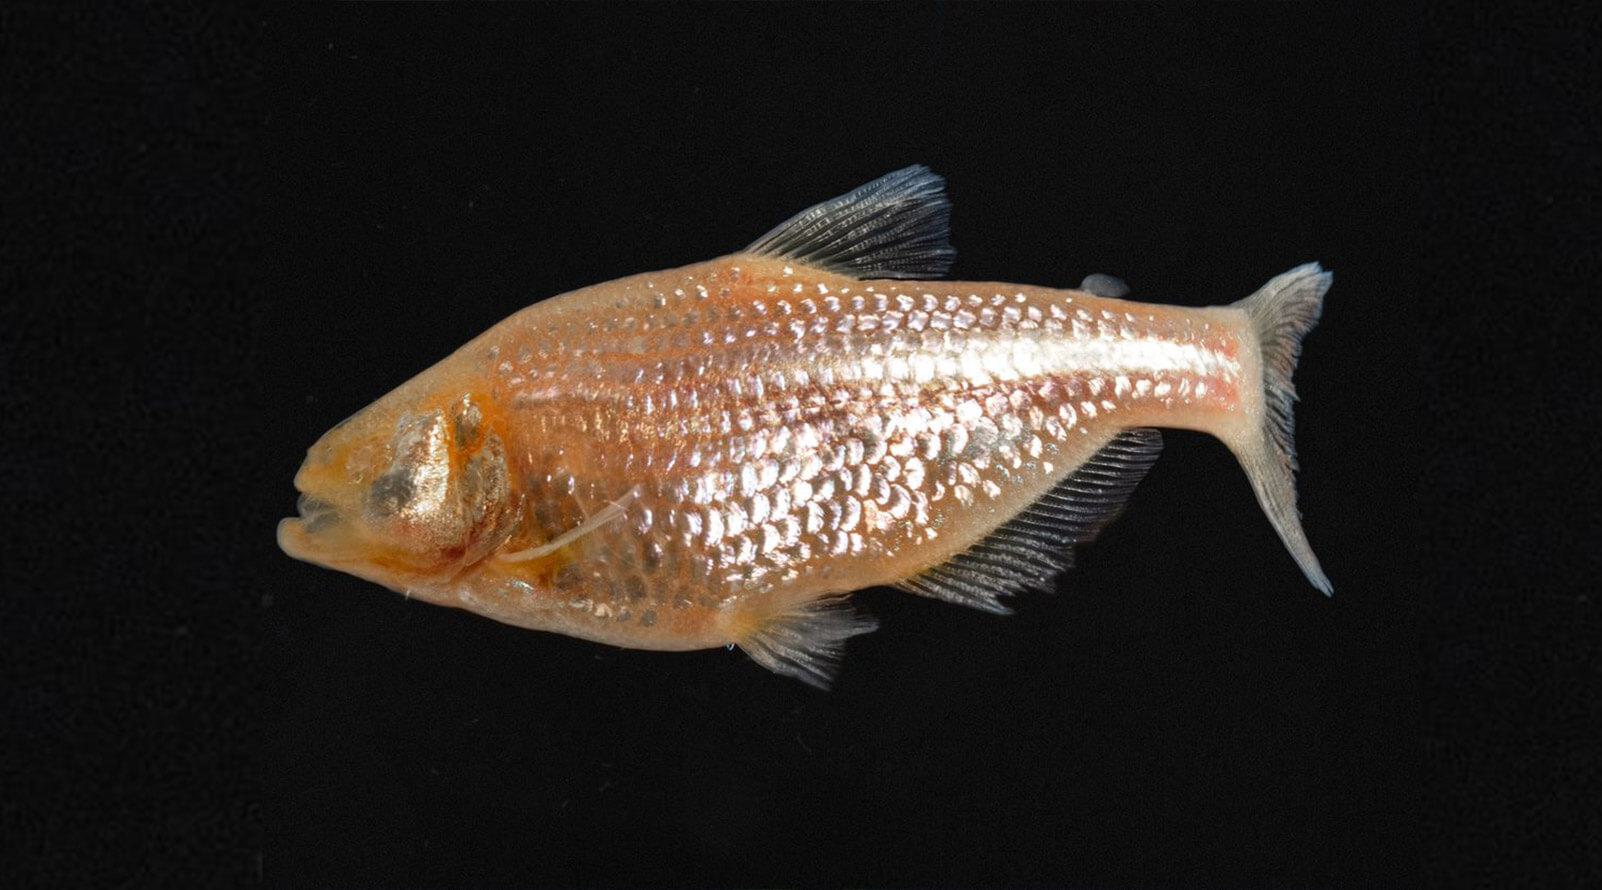 Mexican tetra cavefish, also known as Astyanax mexicanus